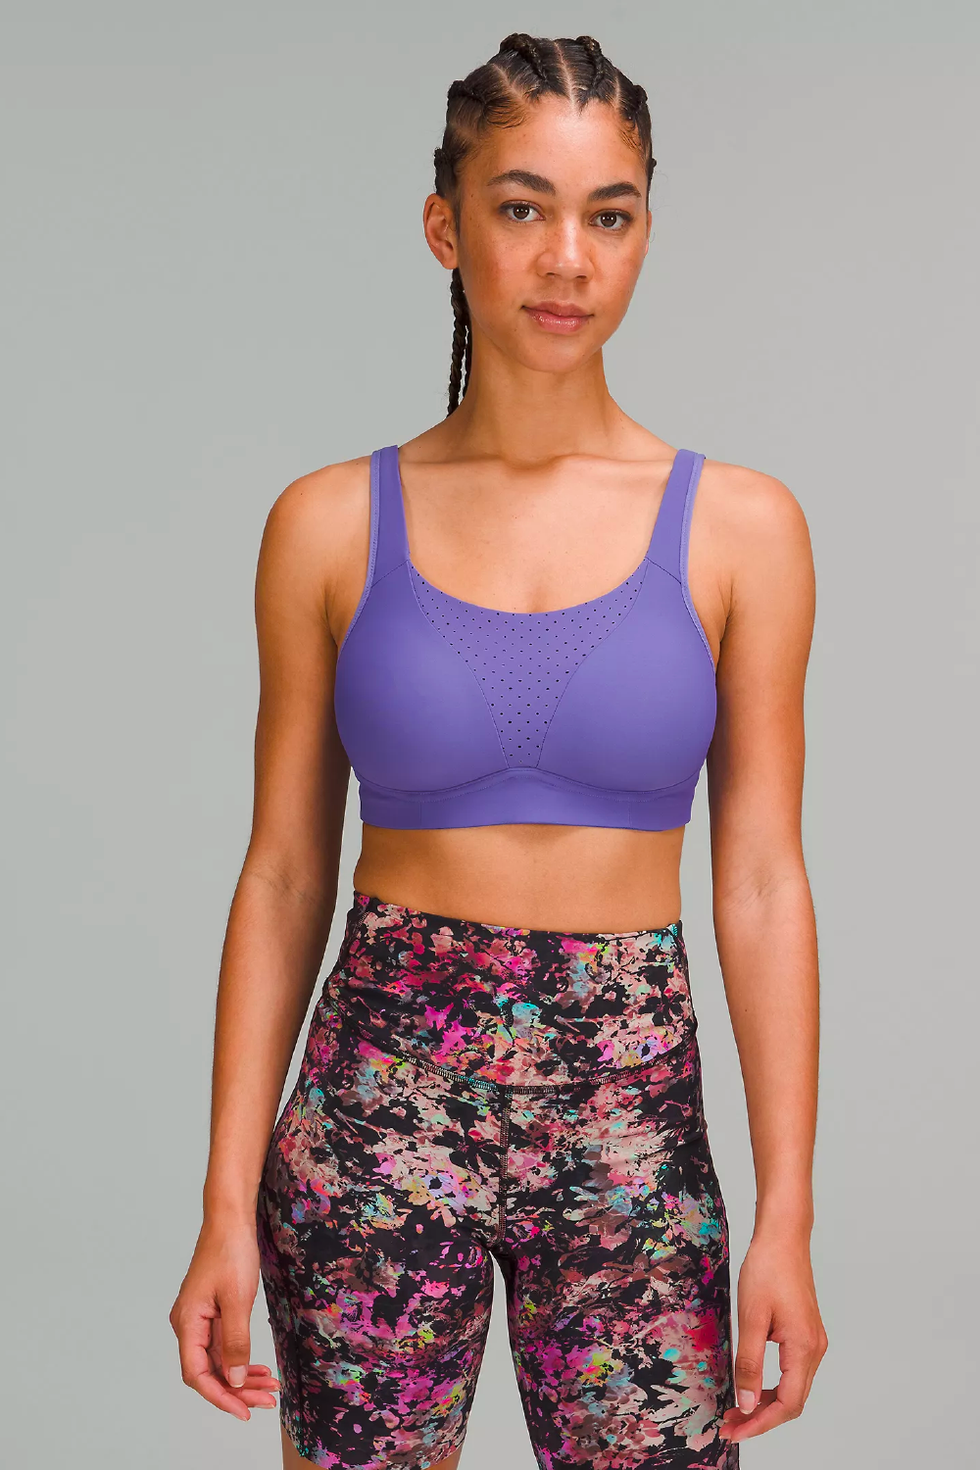 12 Best High-Impact Sports Bras With Support In 2023, According to